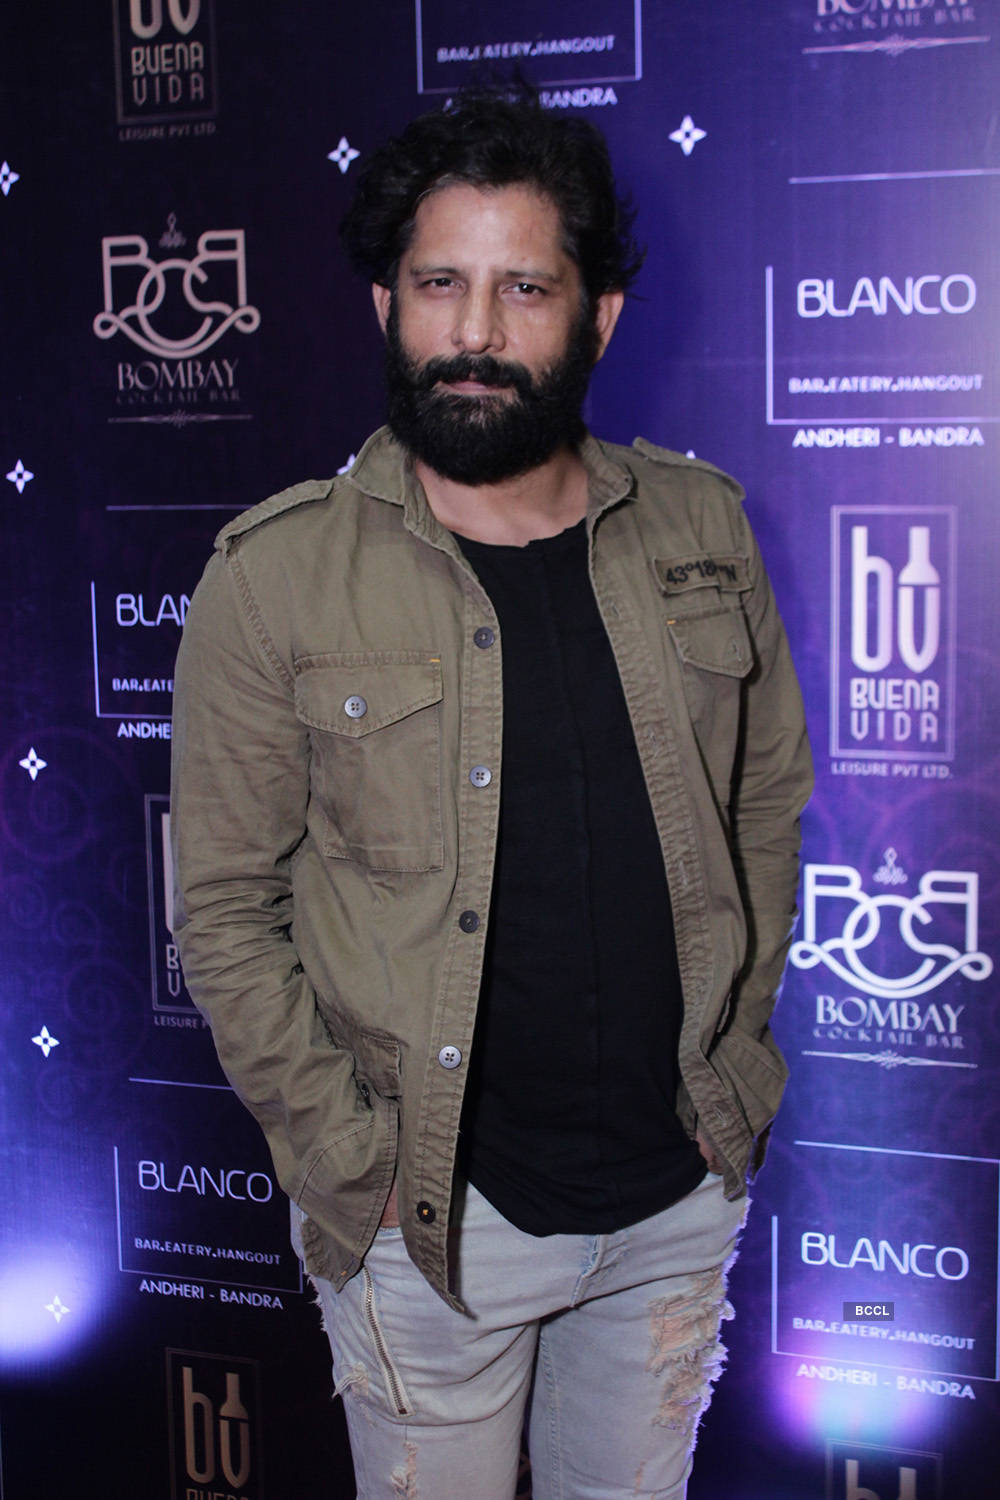 Launch of Ballroom by BCB amidst celebrities and industry insiders